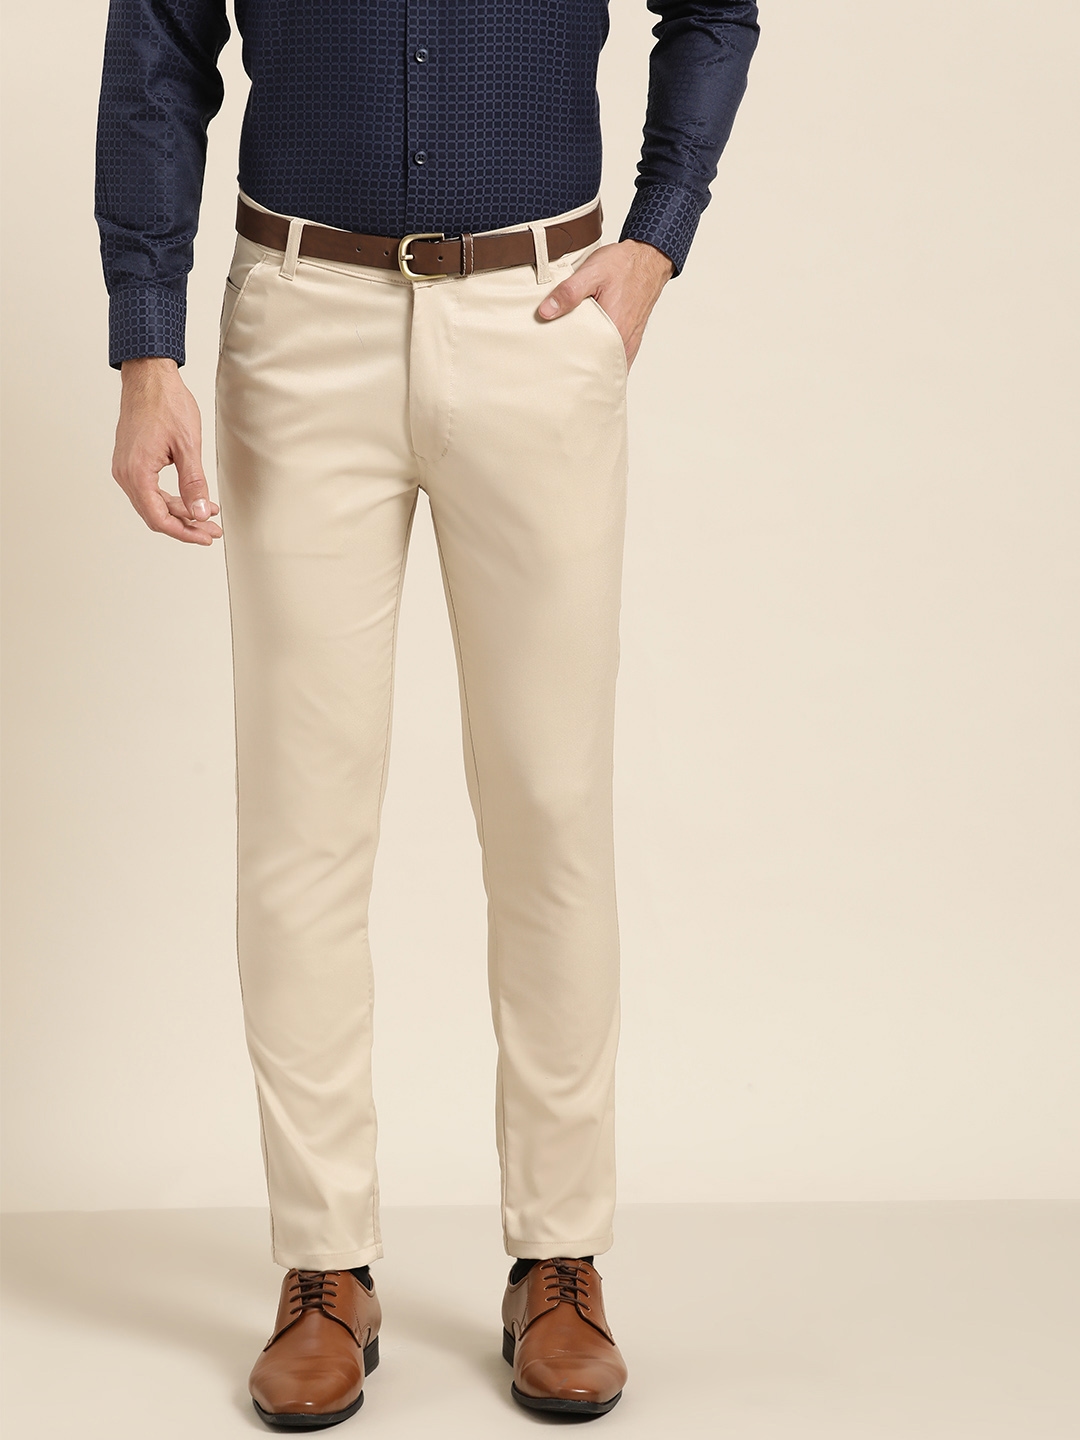 What colour shirt will be perfect for cream trousers  Quora